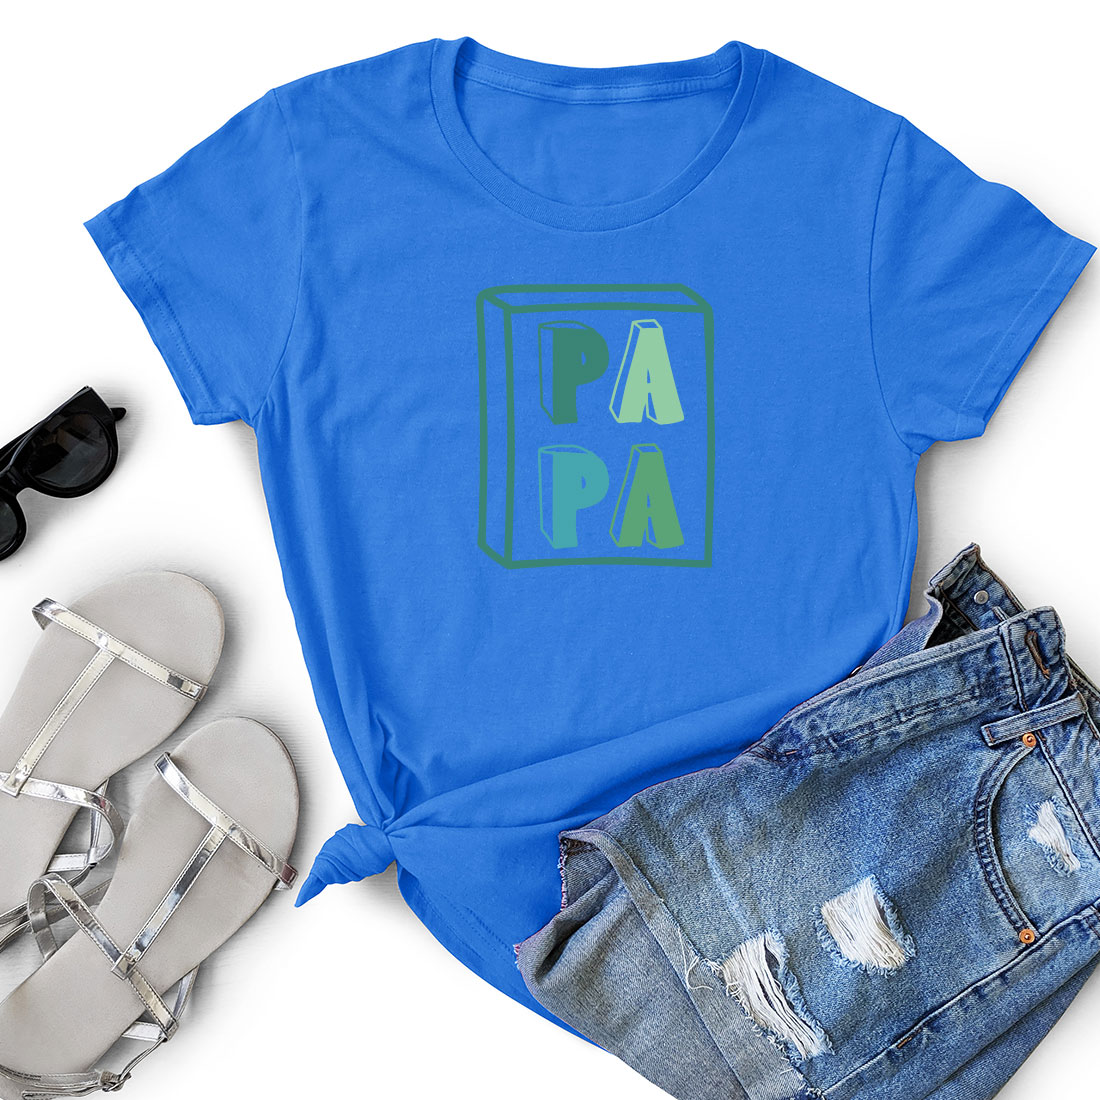 T - shirt that says pa pa on it next to a pair of shorts.